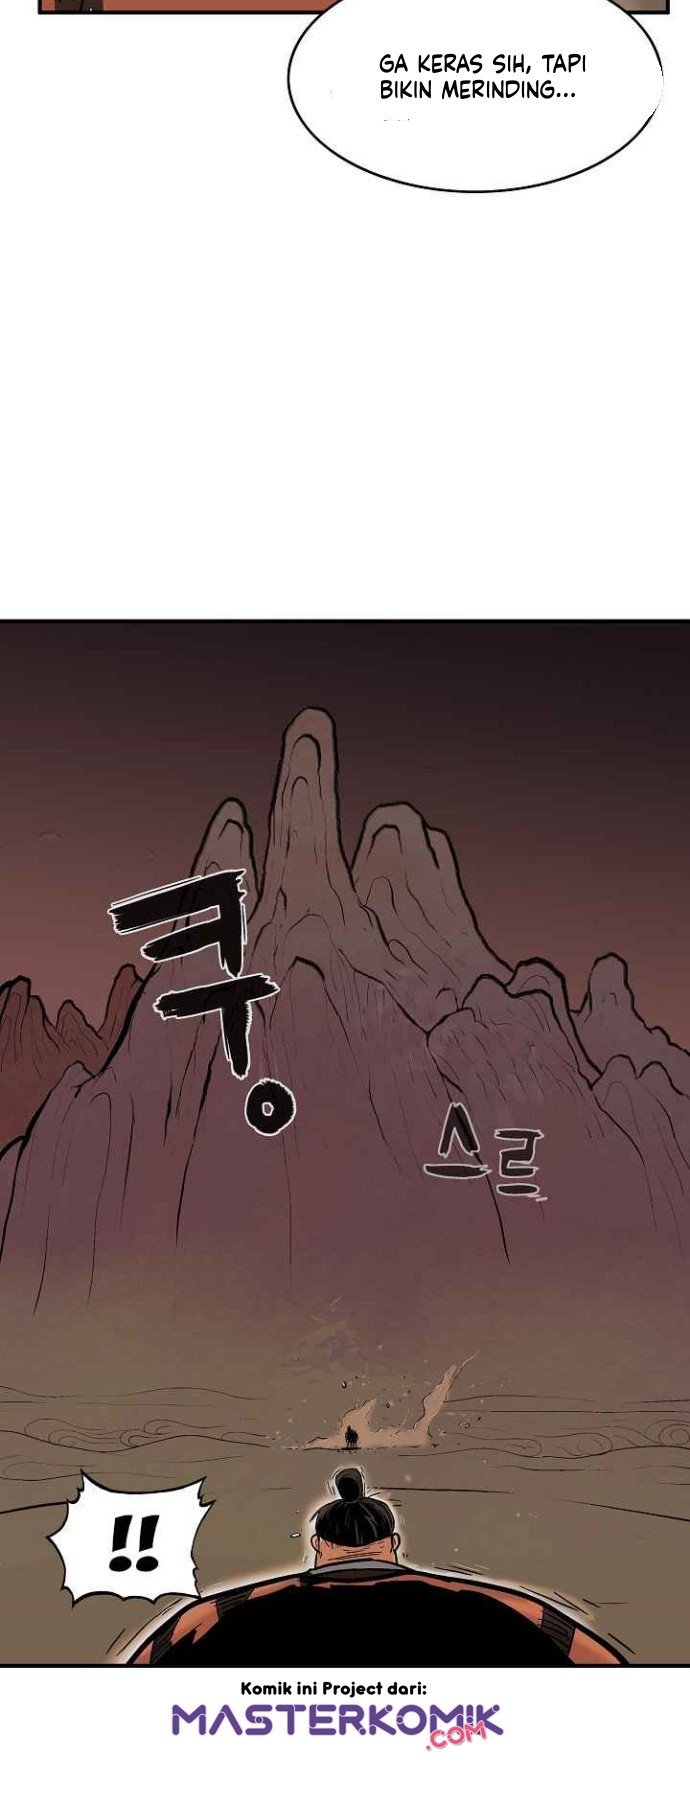 Fist Demon Of Mount Hua Chapter 30